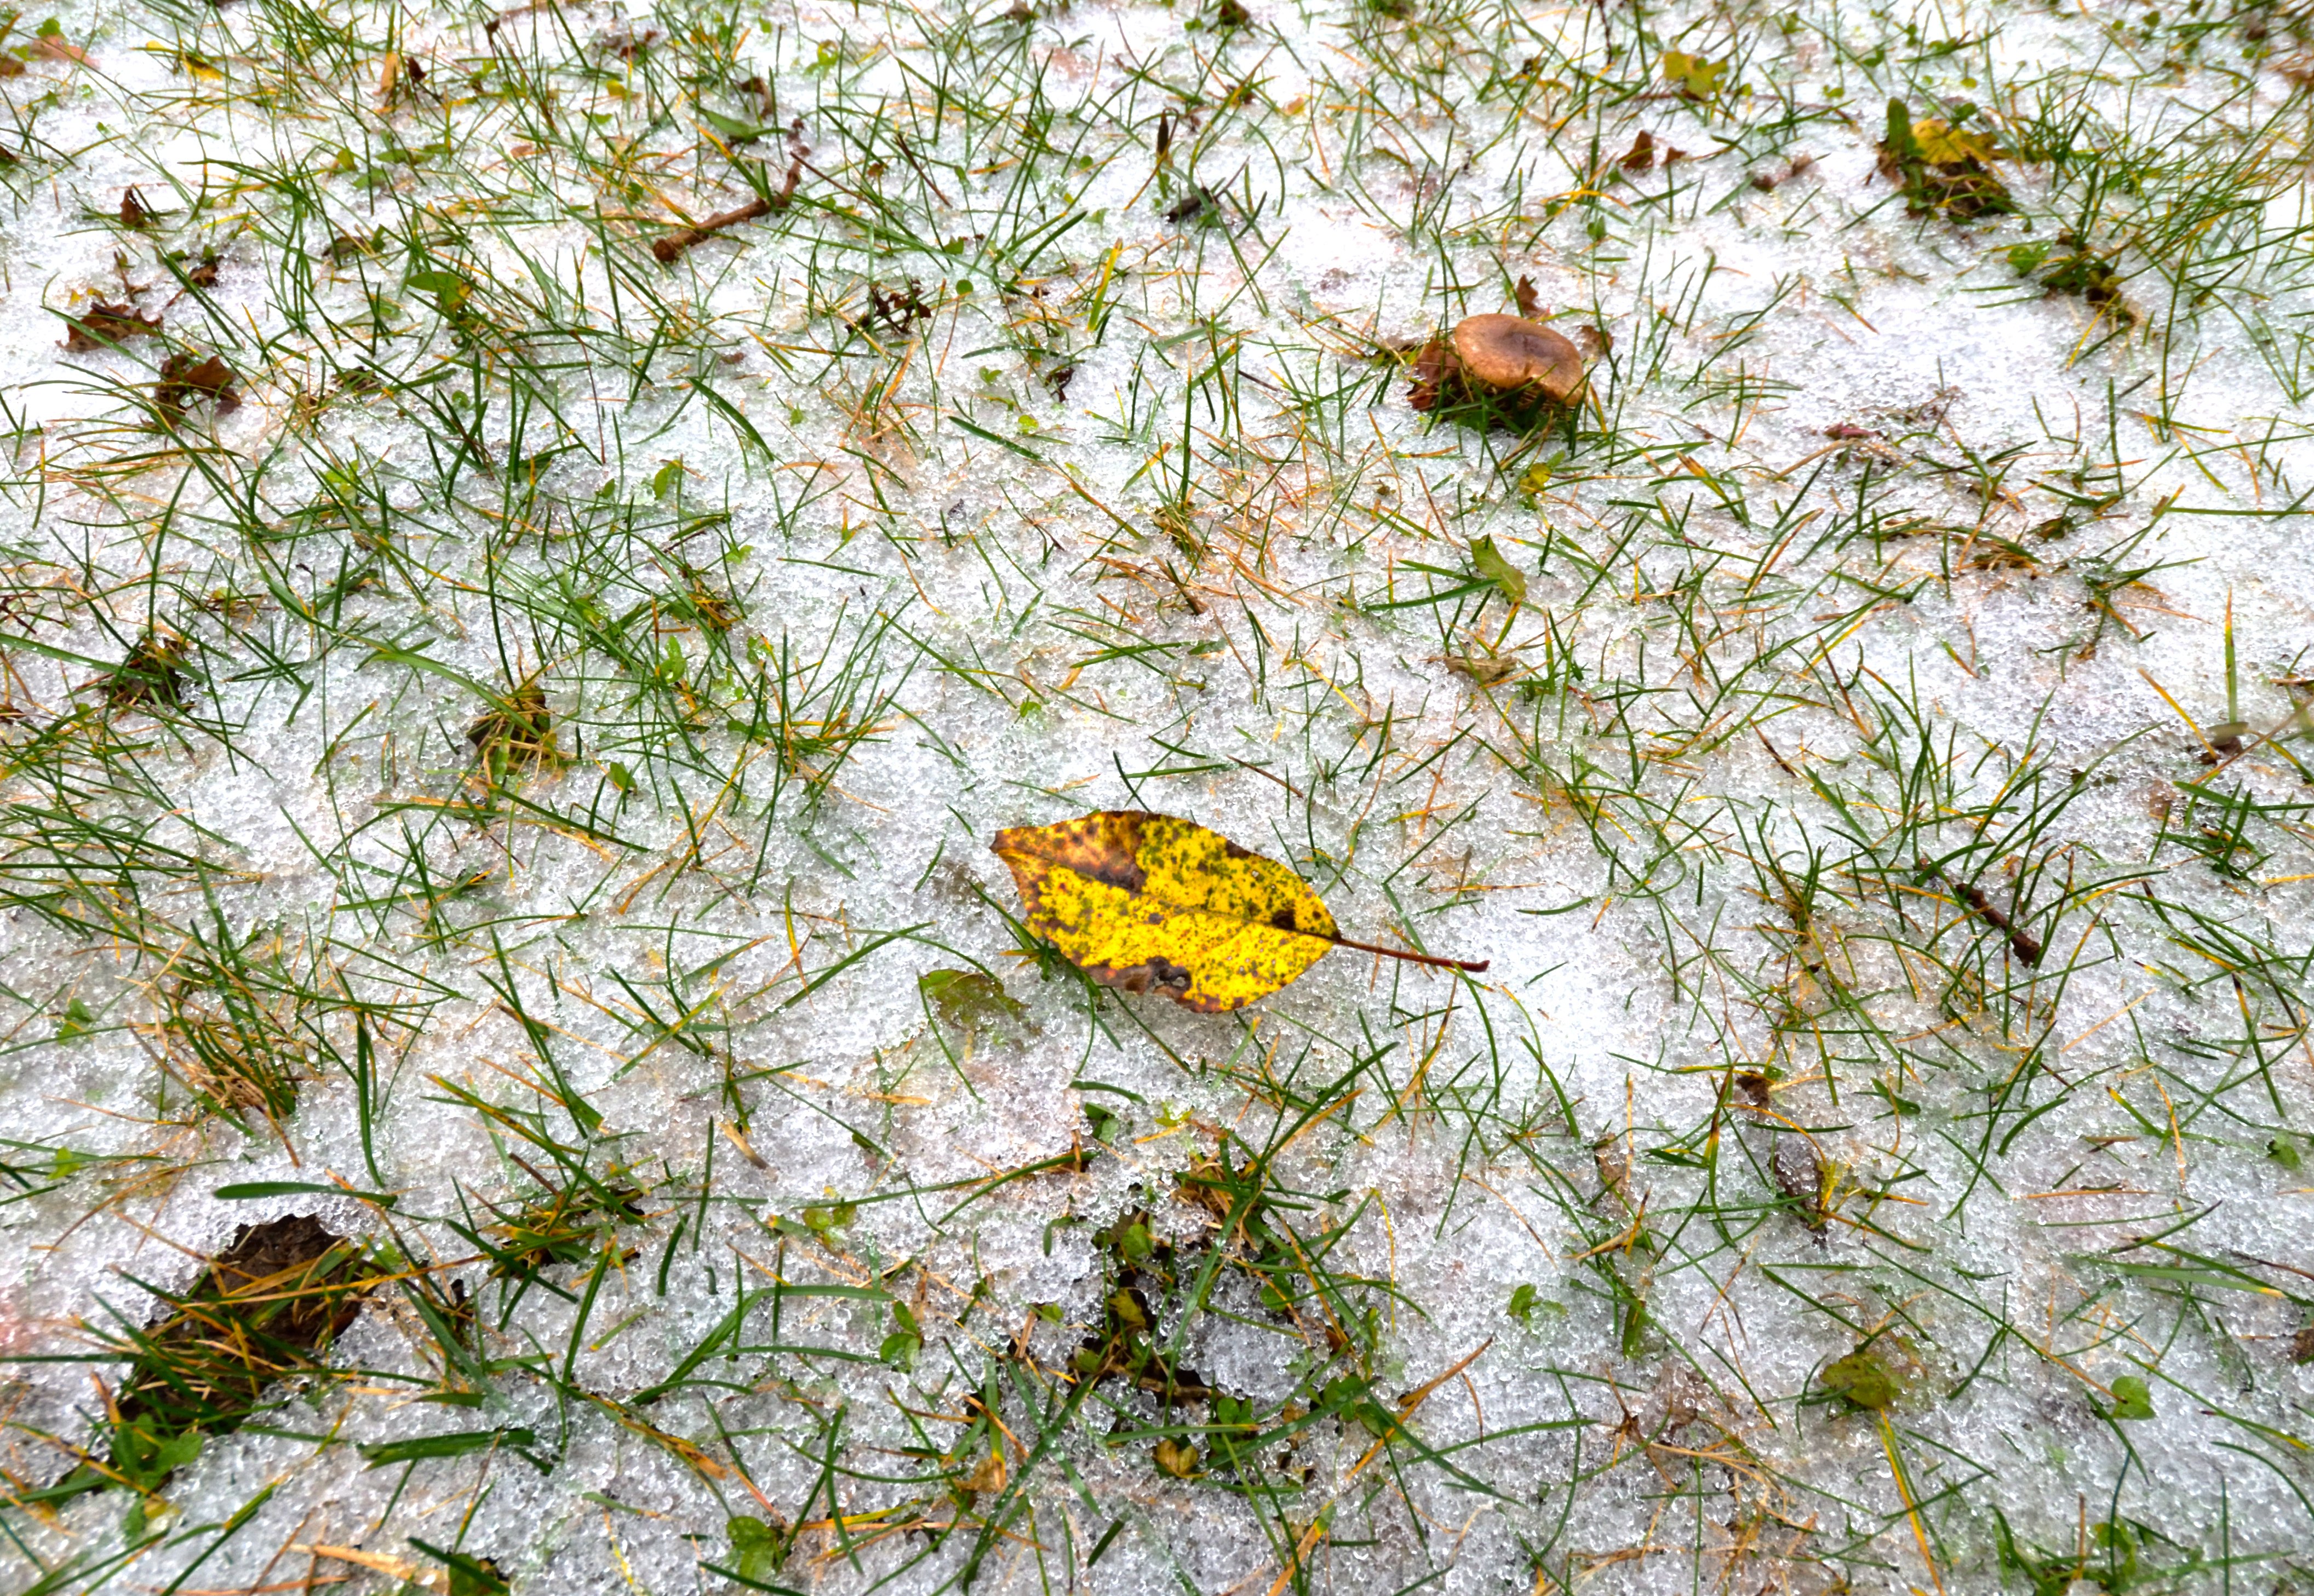 The effects of Ice coverage can cause varying degrees of lawn damage.